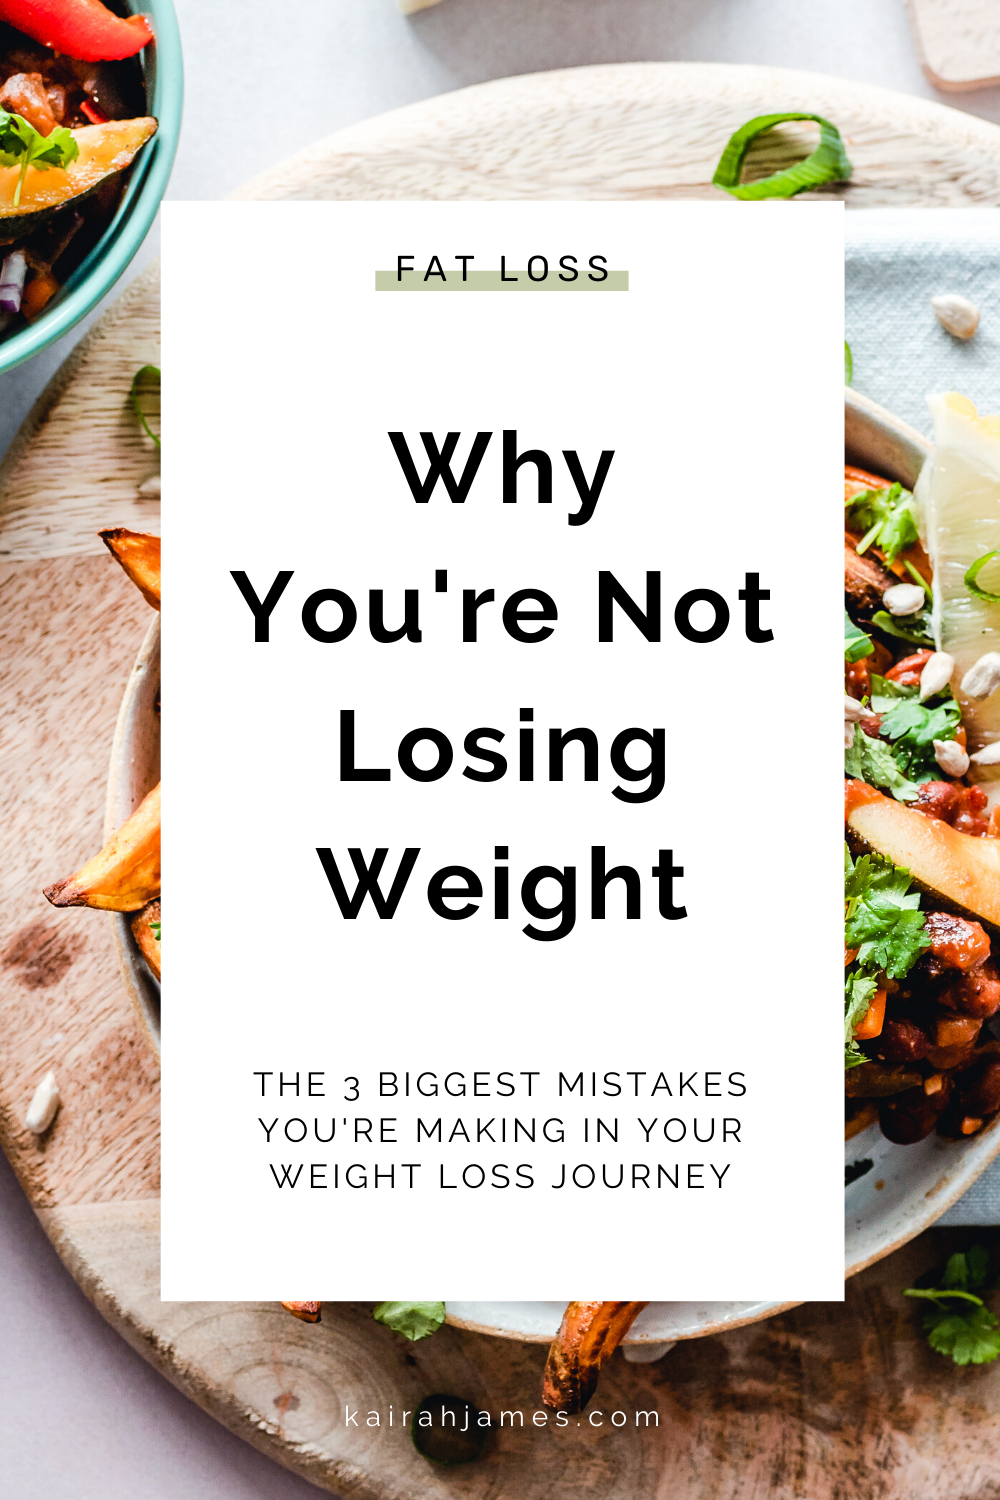 Discover why you’re not losing weight and address the 3 biggest mistakes that you’re currently making in your weight loss journey. Read the full blog post here:  https://www.kairahjames.com/blog/why-youre-not-losing-weight